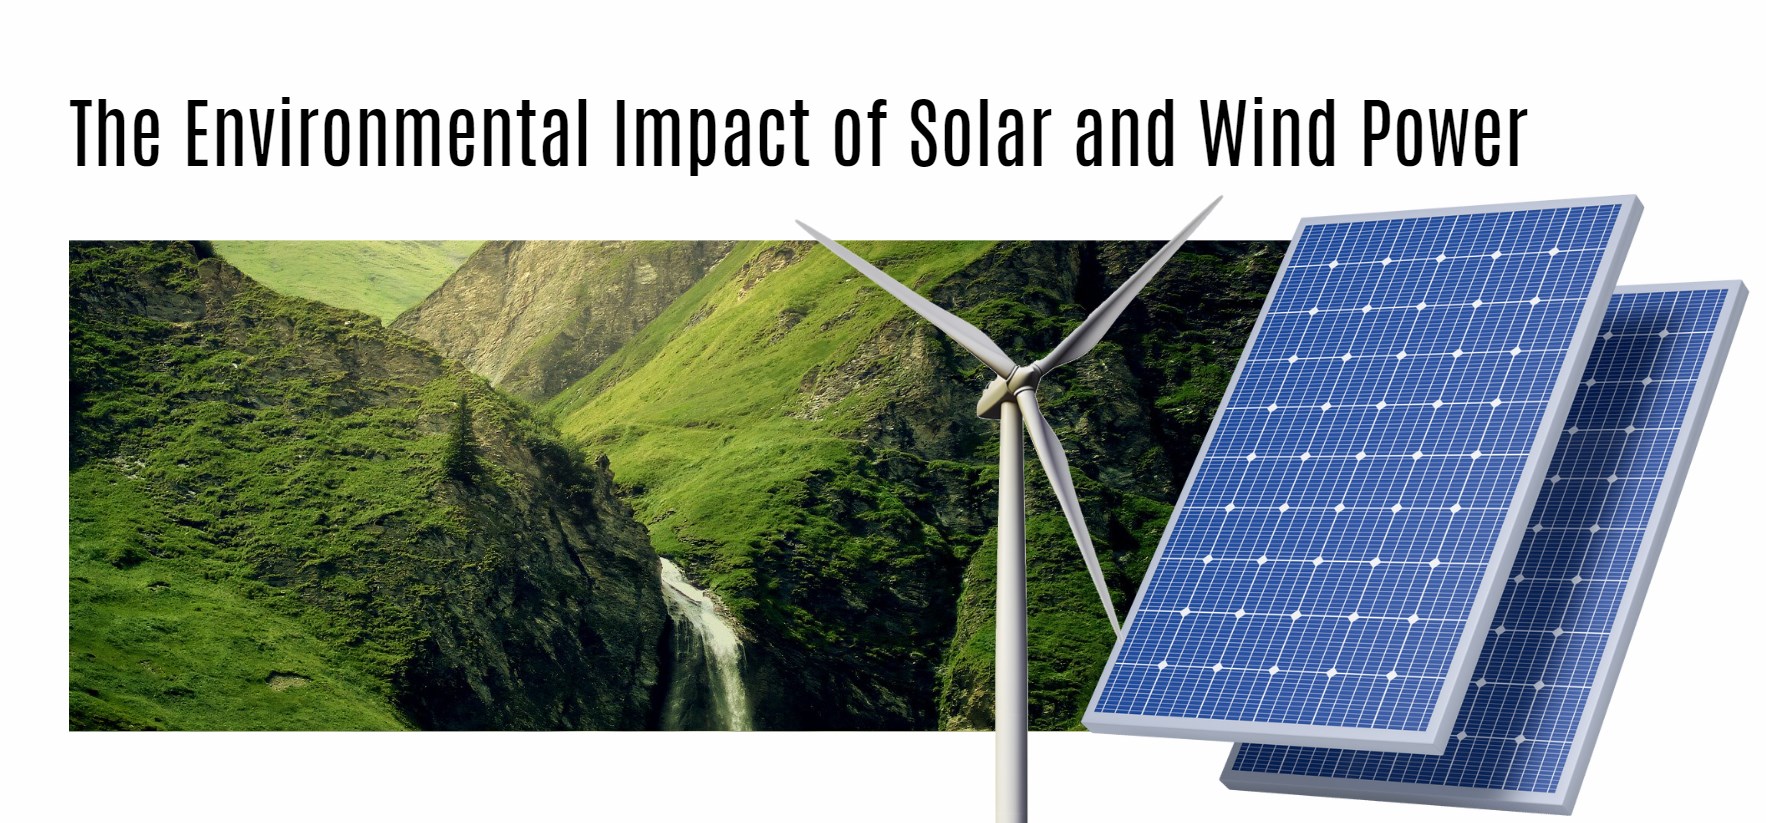 The Environmental Impact of Solar and Wind Power